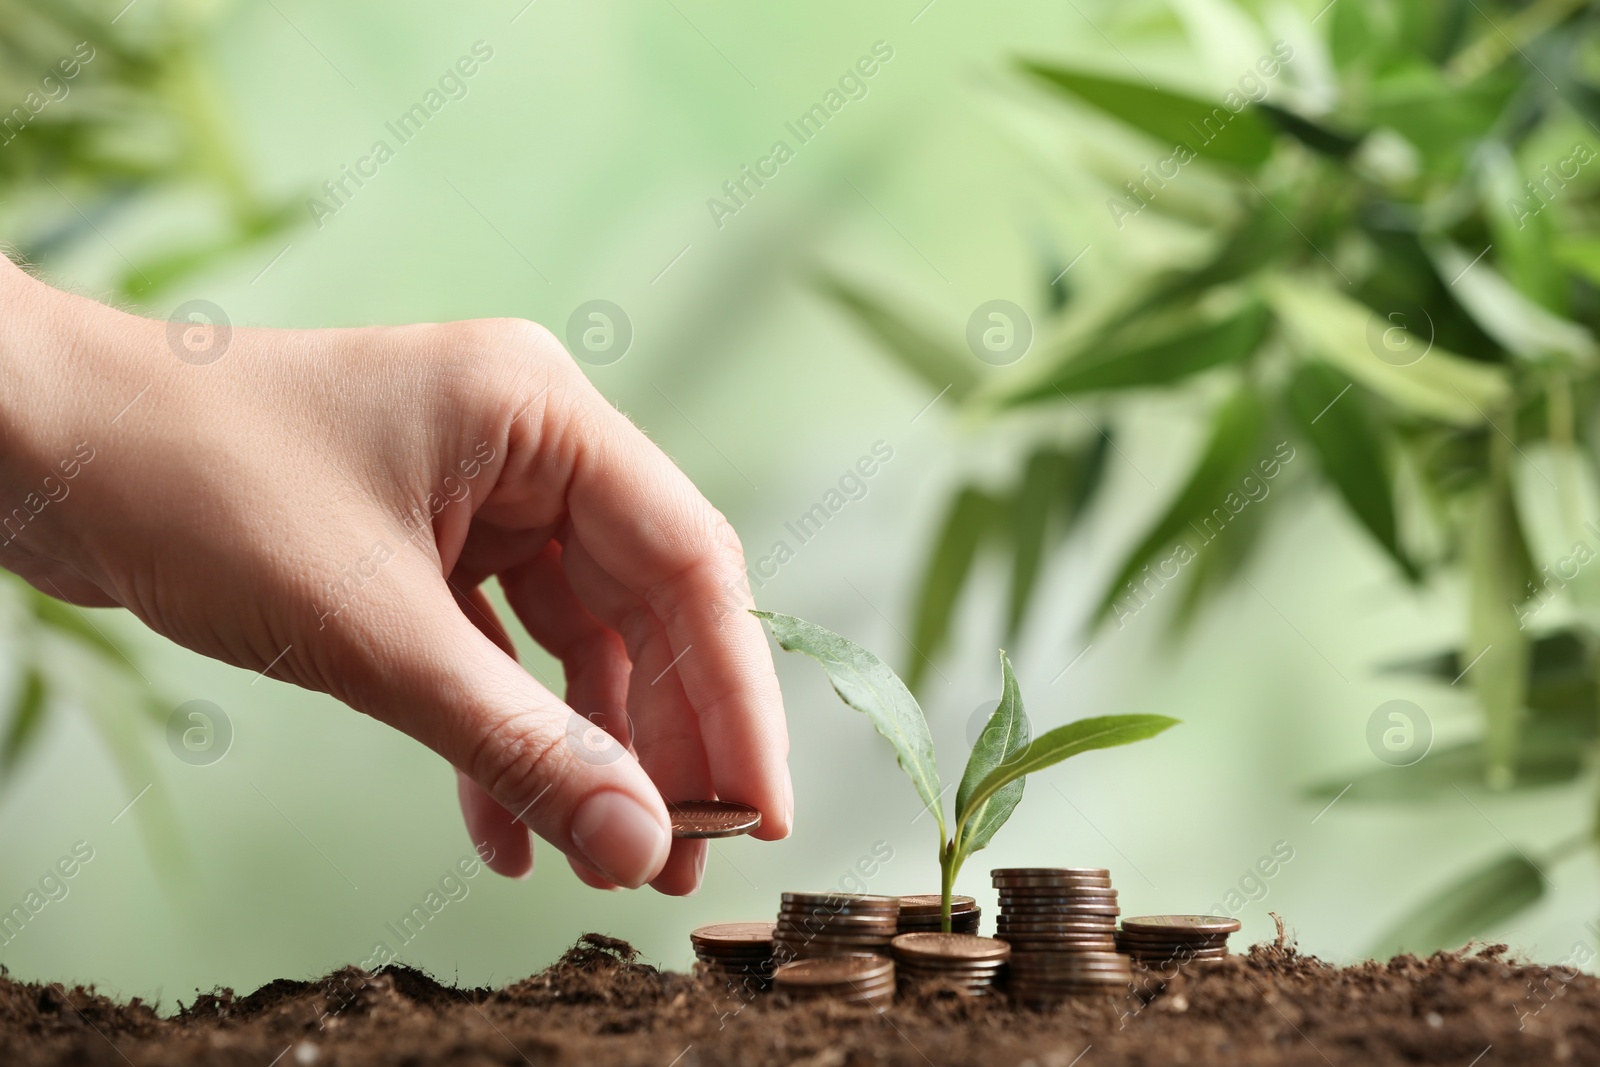 Photo of Woman putting coin onto pile and green plant on soil against blurred background, closeup